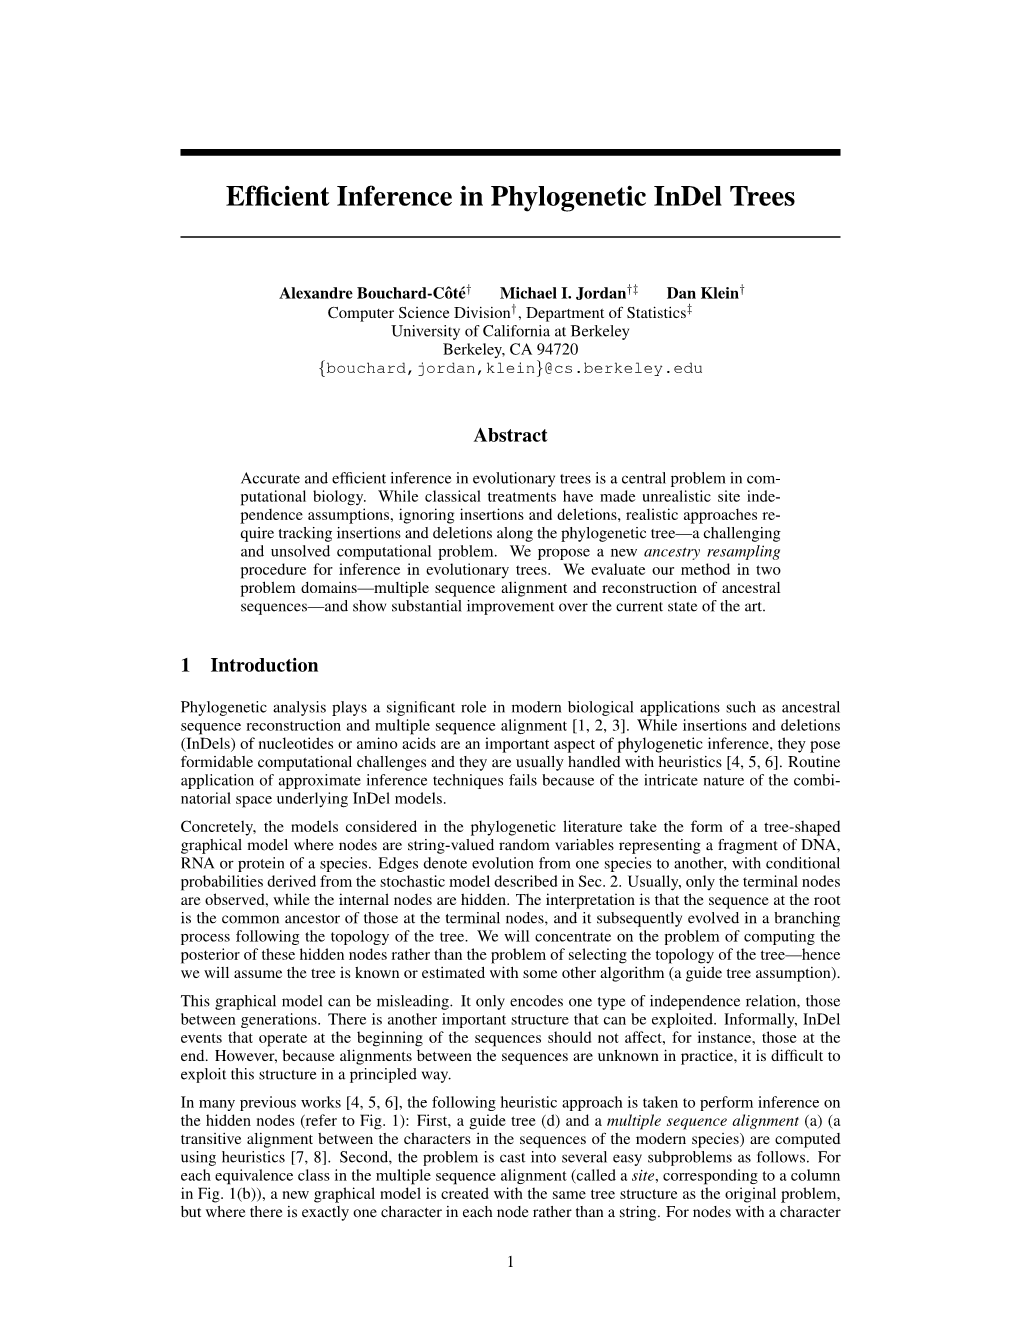 Efficient Inference in Phylogenetic Indel Trees